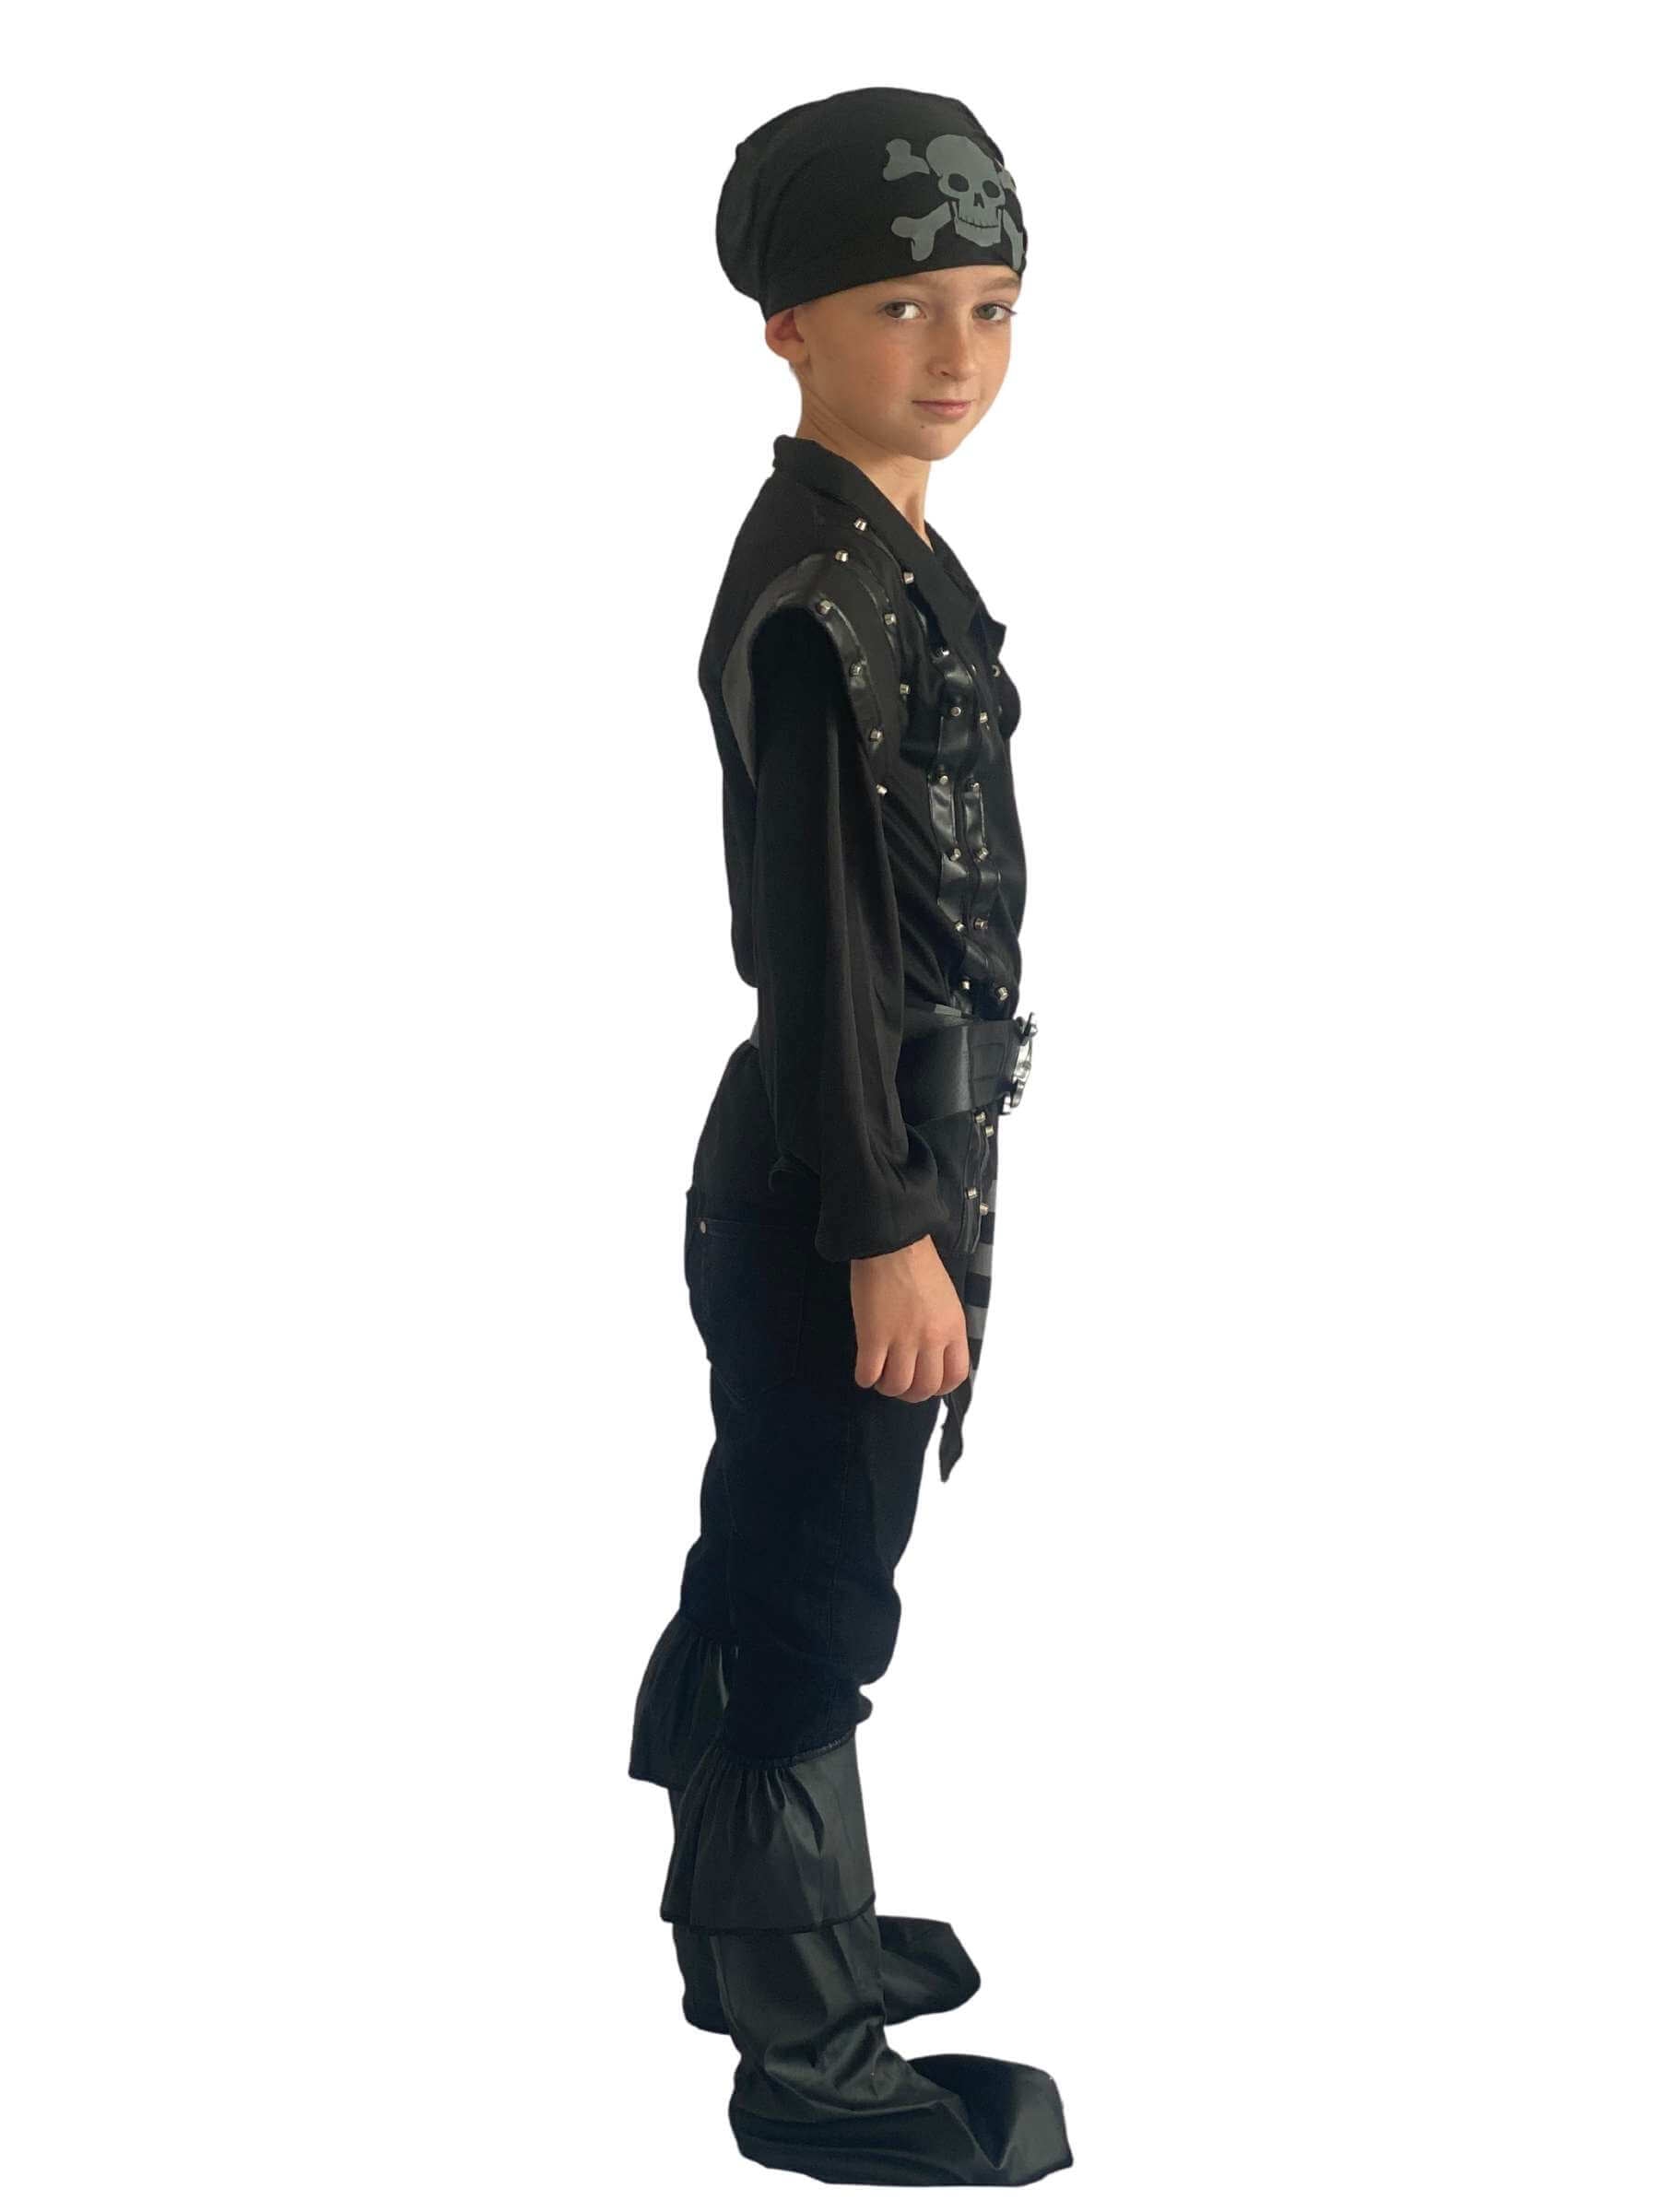 Boy wearing a black pirate costume standing side ways showing the boot covers.